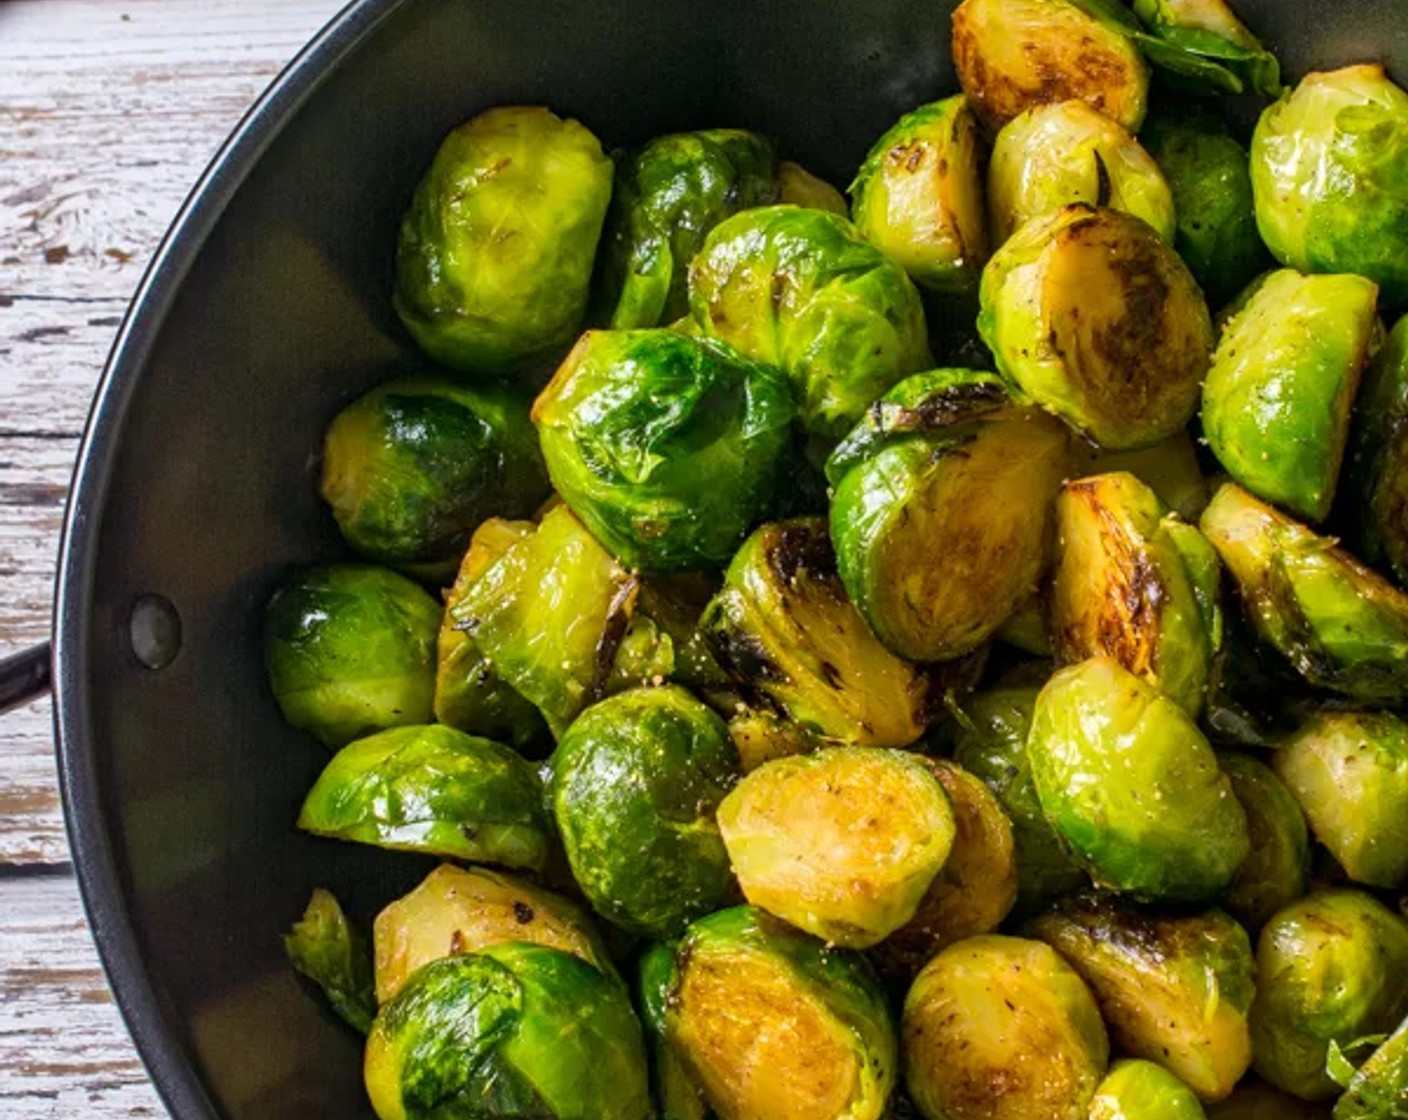 Wok Stir-Fried Brussels Sprouts